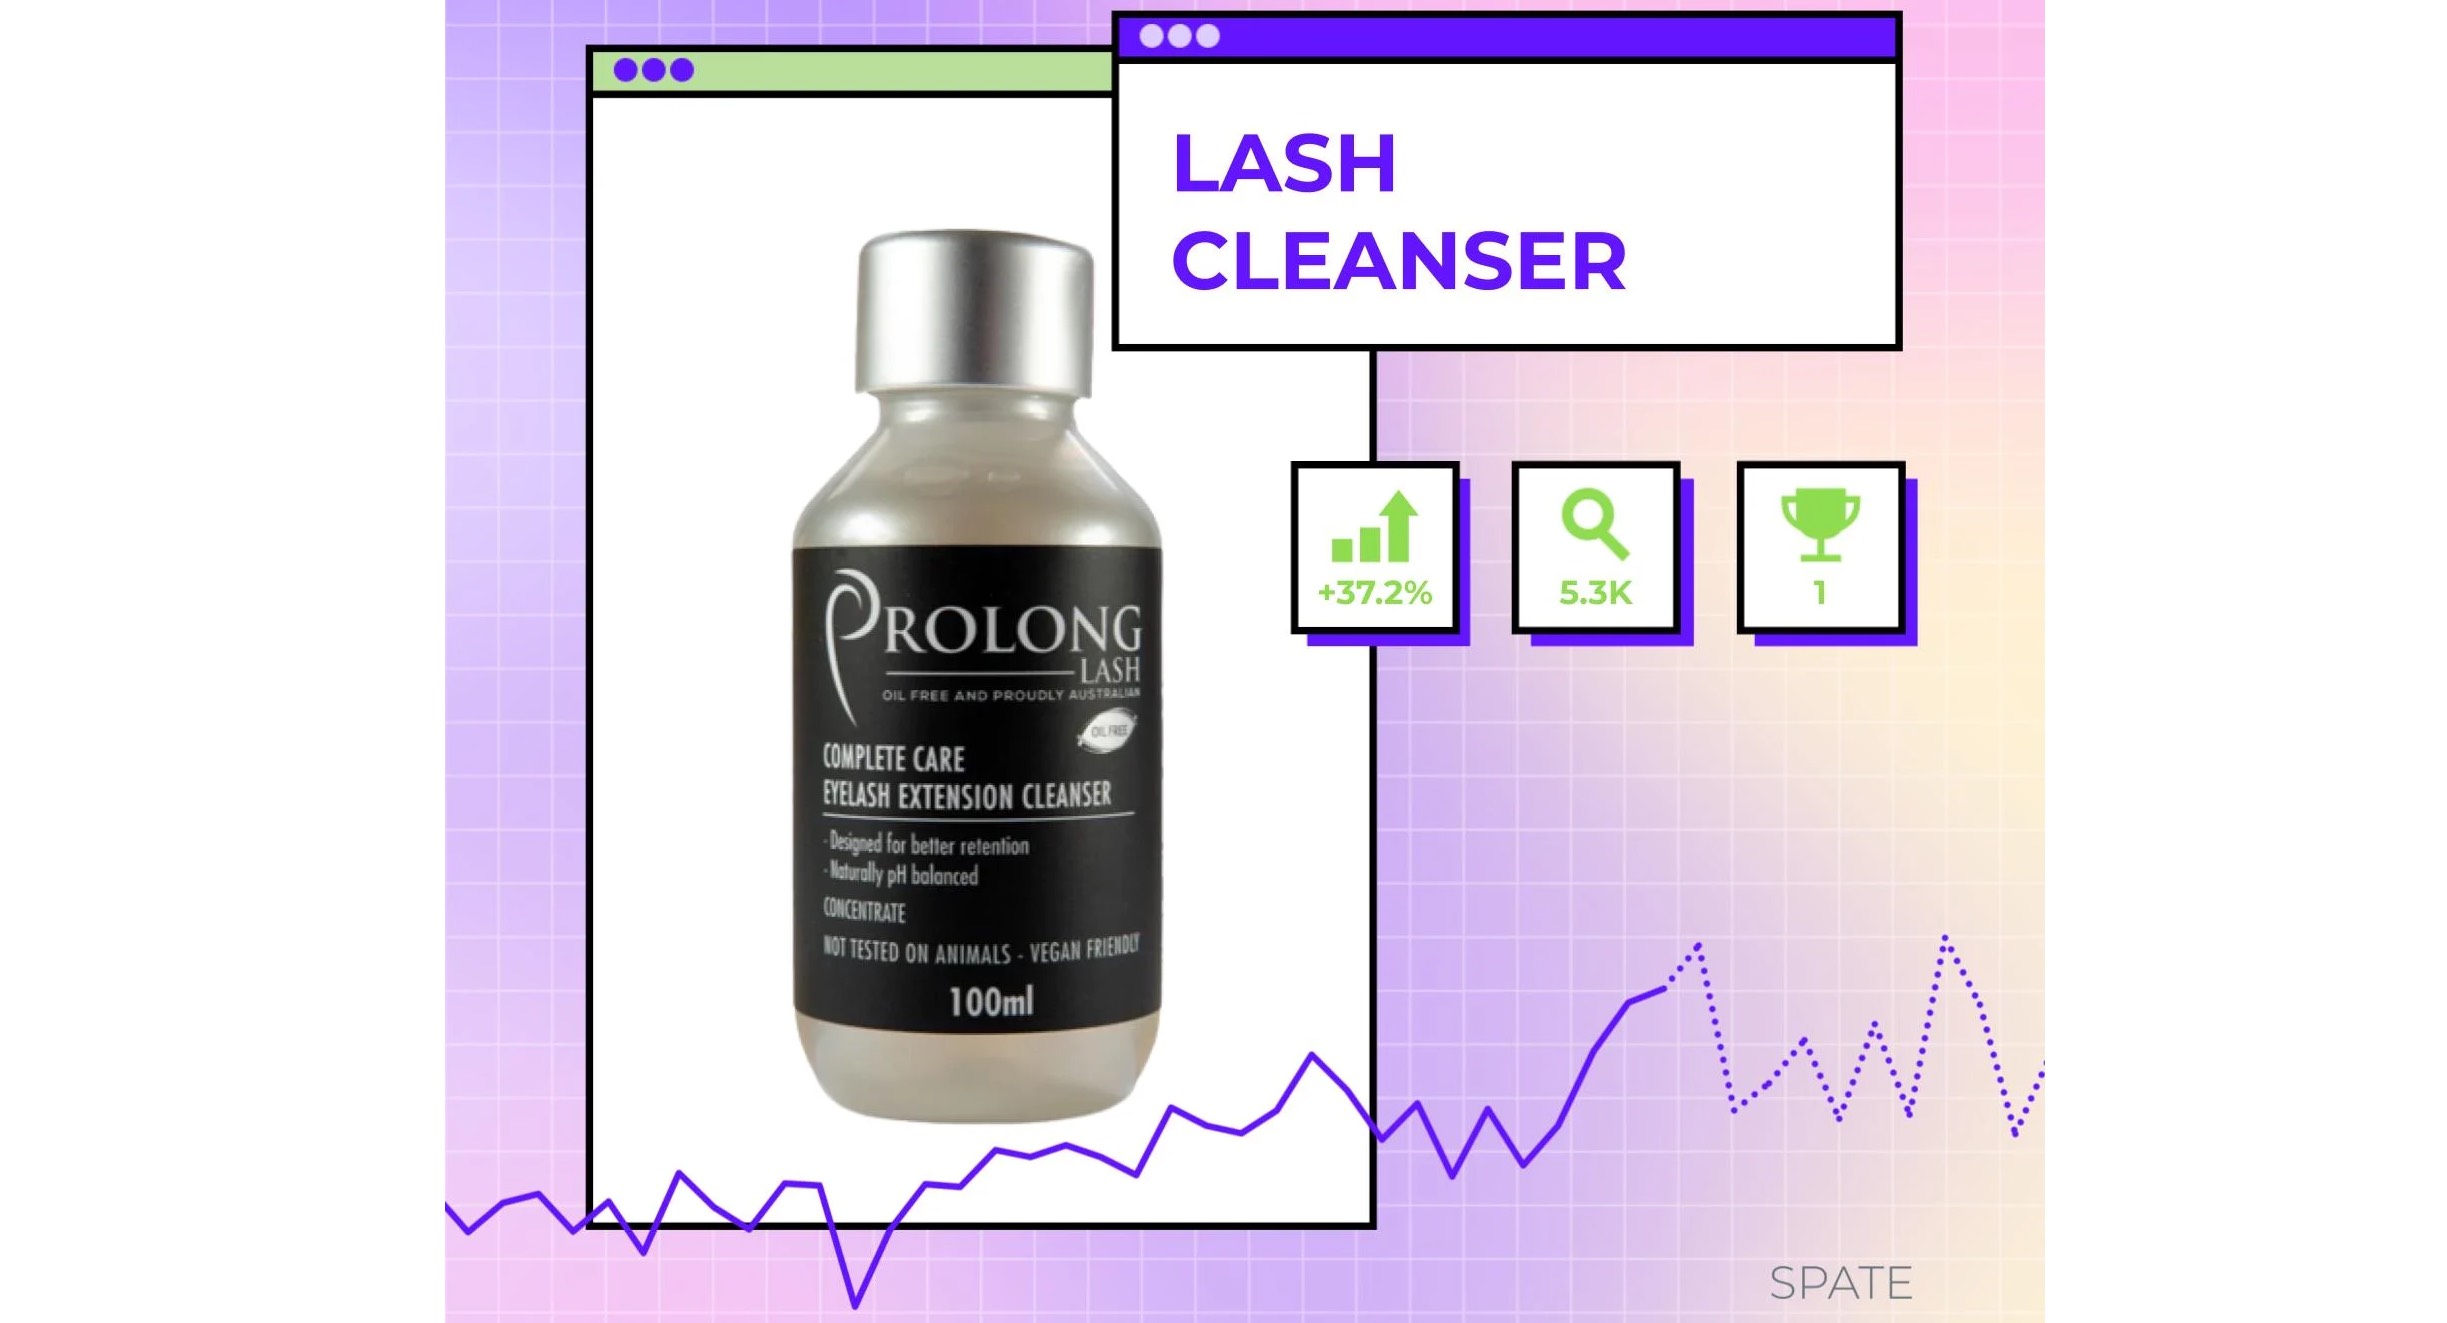 Lash-Specific Cleansers, Red Light Therapy for Weight Loss and Collagen-Containing Body Lotion Are Top of Mind for Consumers: Spate